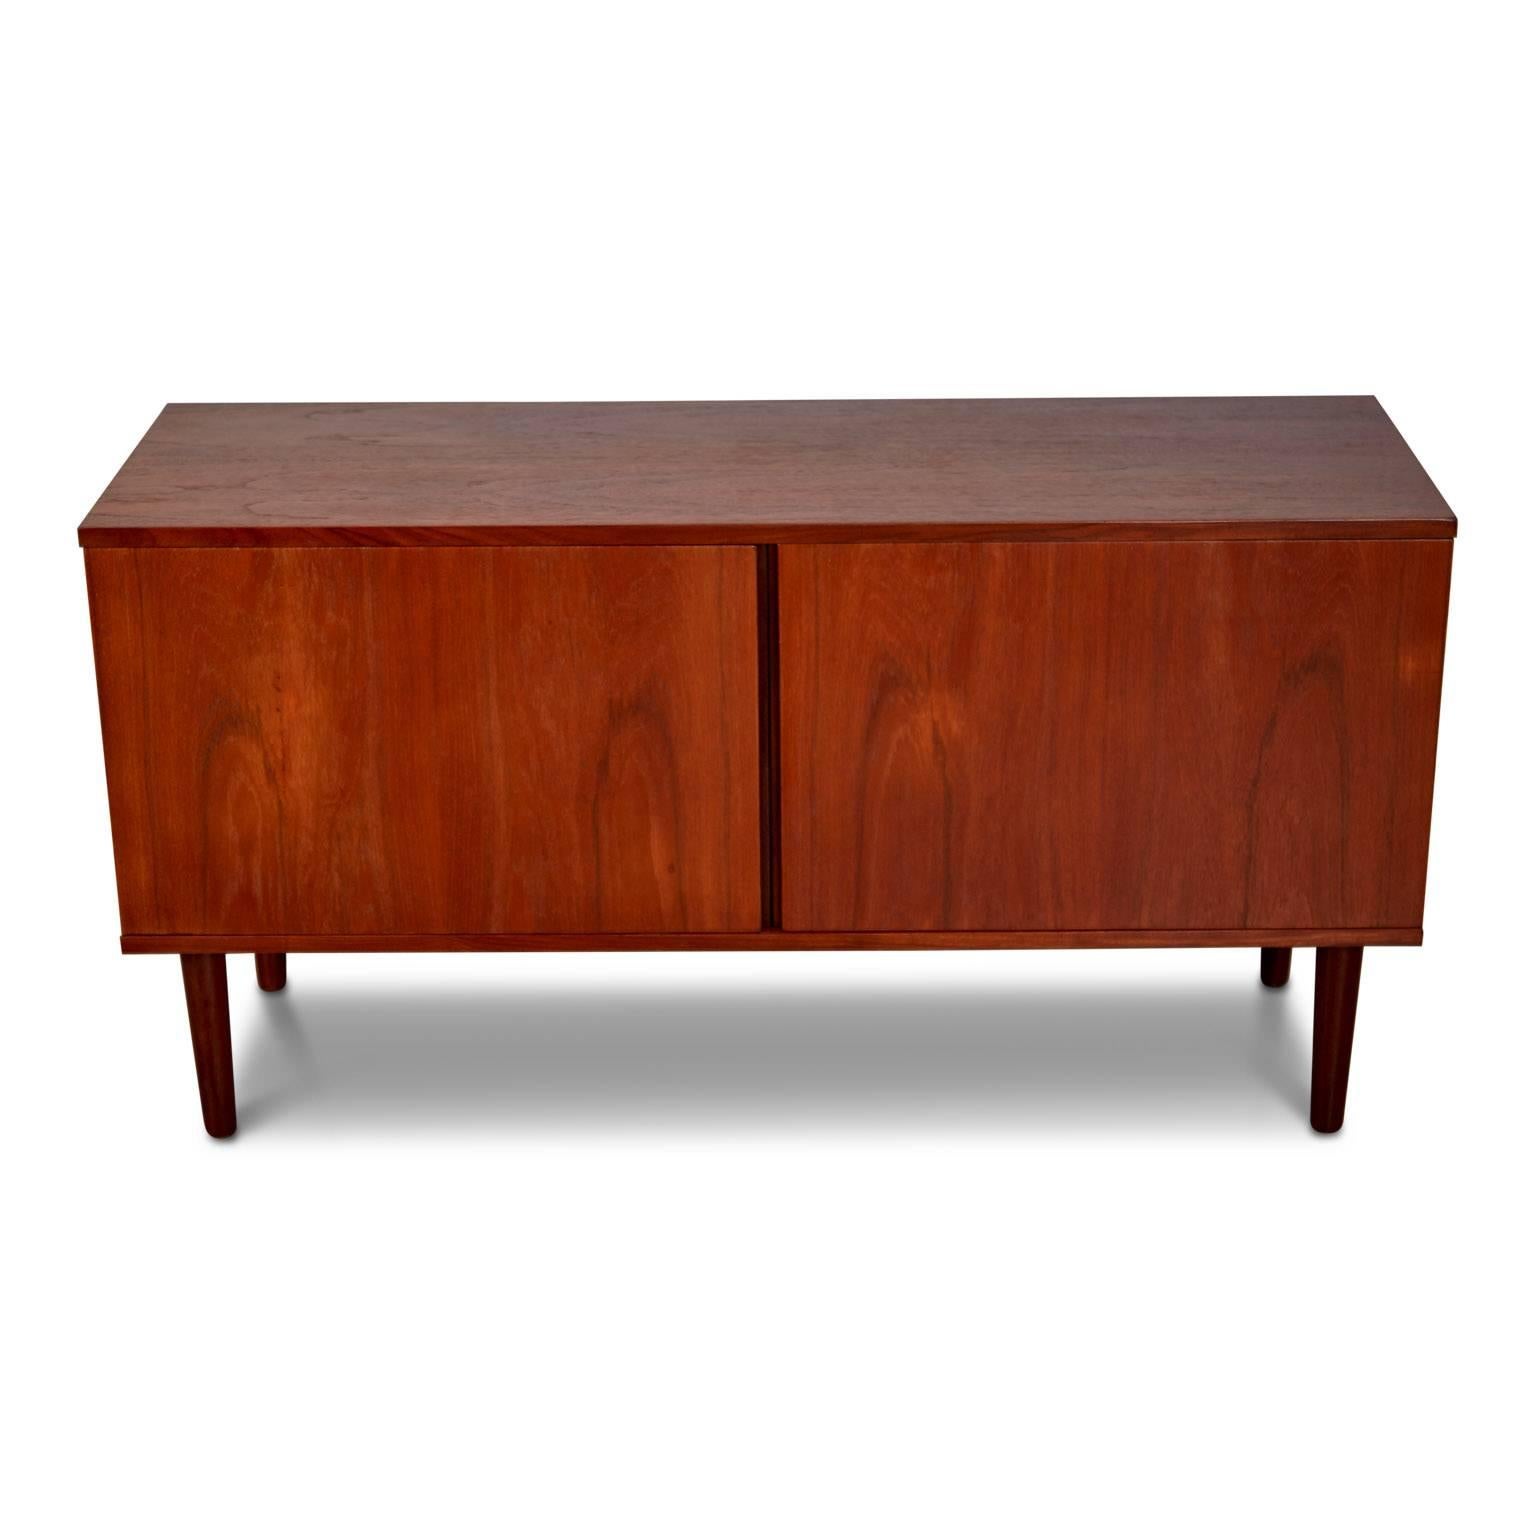 Petitely proportioned Scandinavian credenza fabricated from teak. The slender, simplistic design comprises of two doors which open to reveal shelf spaces either side - perfect for storing dish ware, table linens and other household items and is set